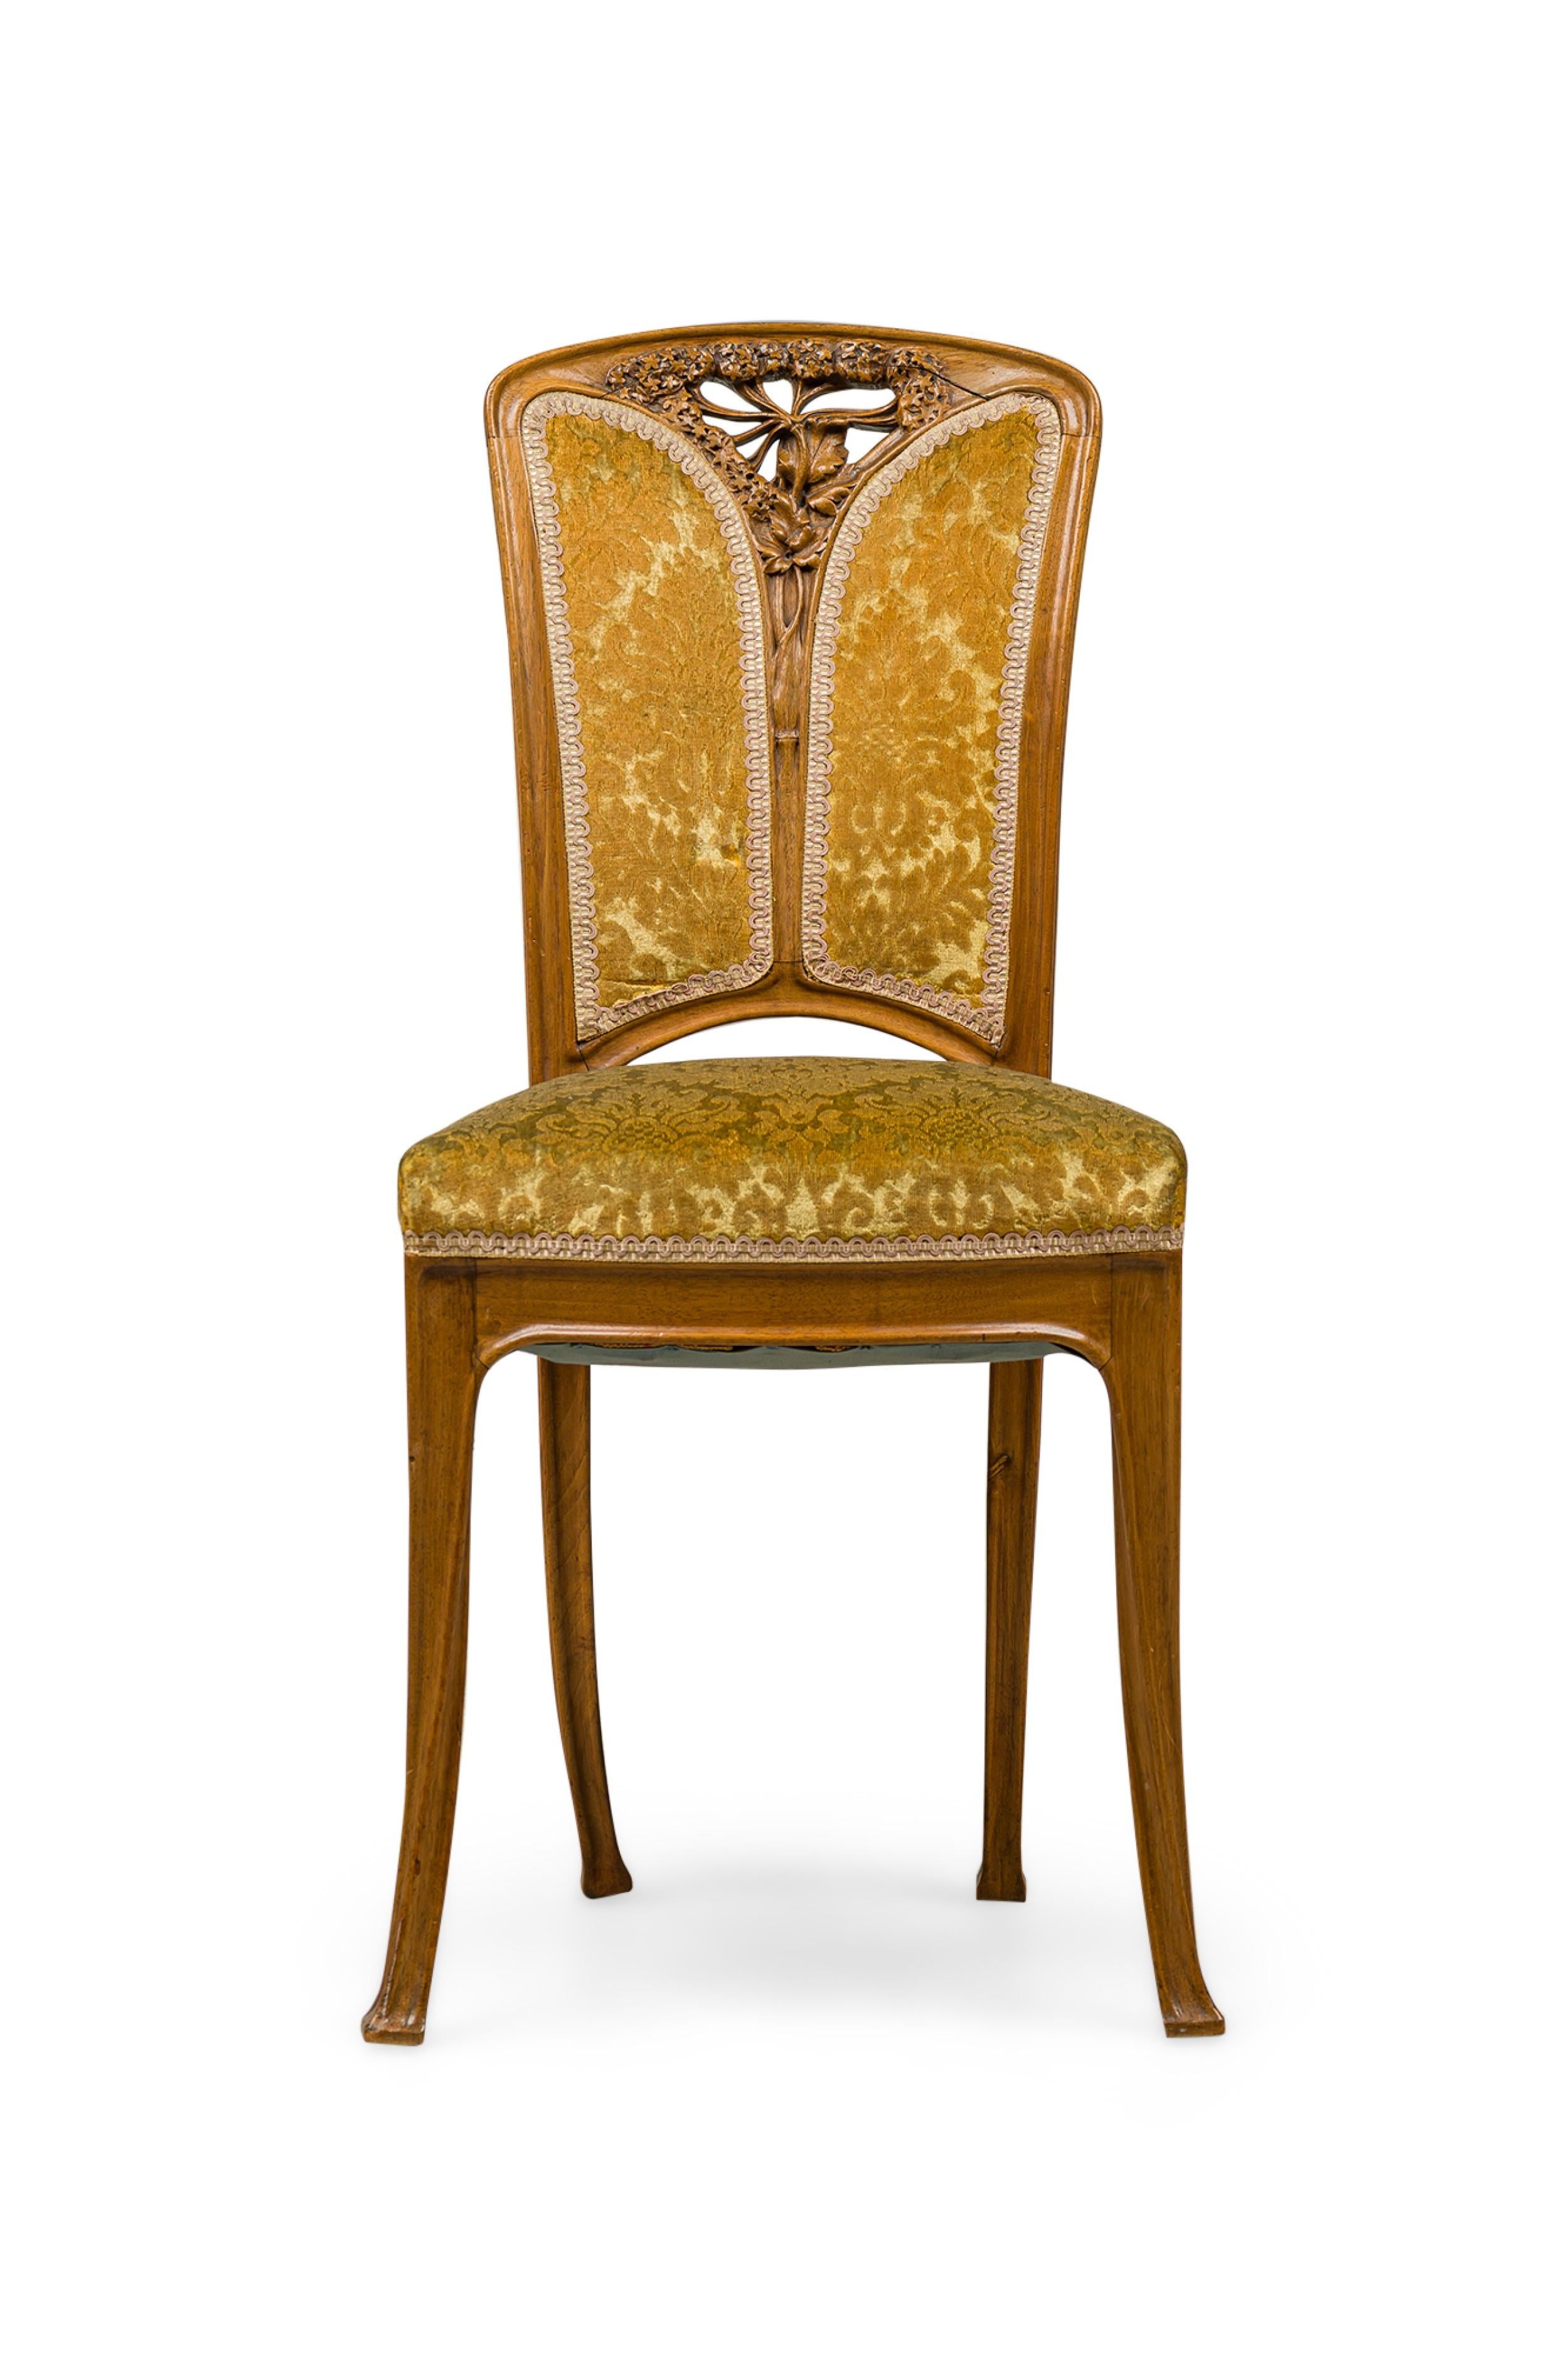 SET of 6 French Art Nouveau side chairs with the backs having a centered carved ombelle and foliate reticulated frame (NOTE: 2 upholstered in a gold velvet damask, 4 unupholstered) (PRICED AS SET)(CAMILLE GAUTHIER)
 

 4 chairs are frame-only,